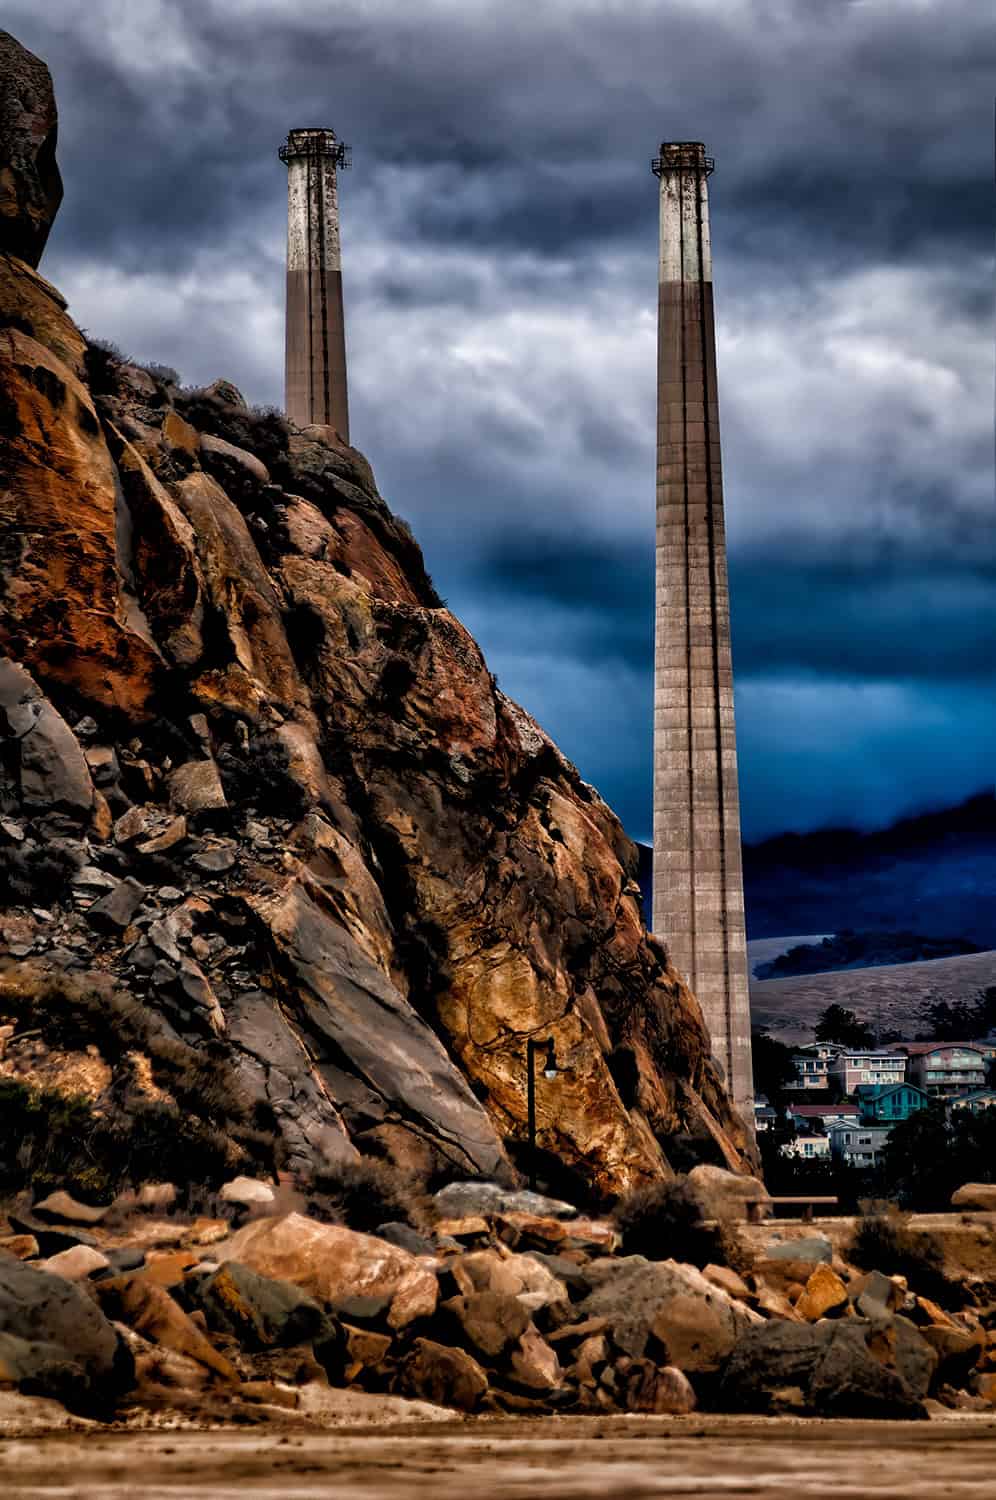 Morro Rock and two of the three stacks from the shuttered power plant  